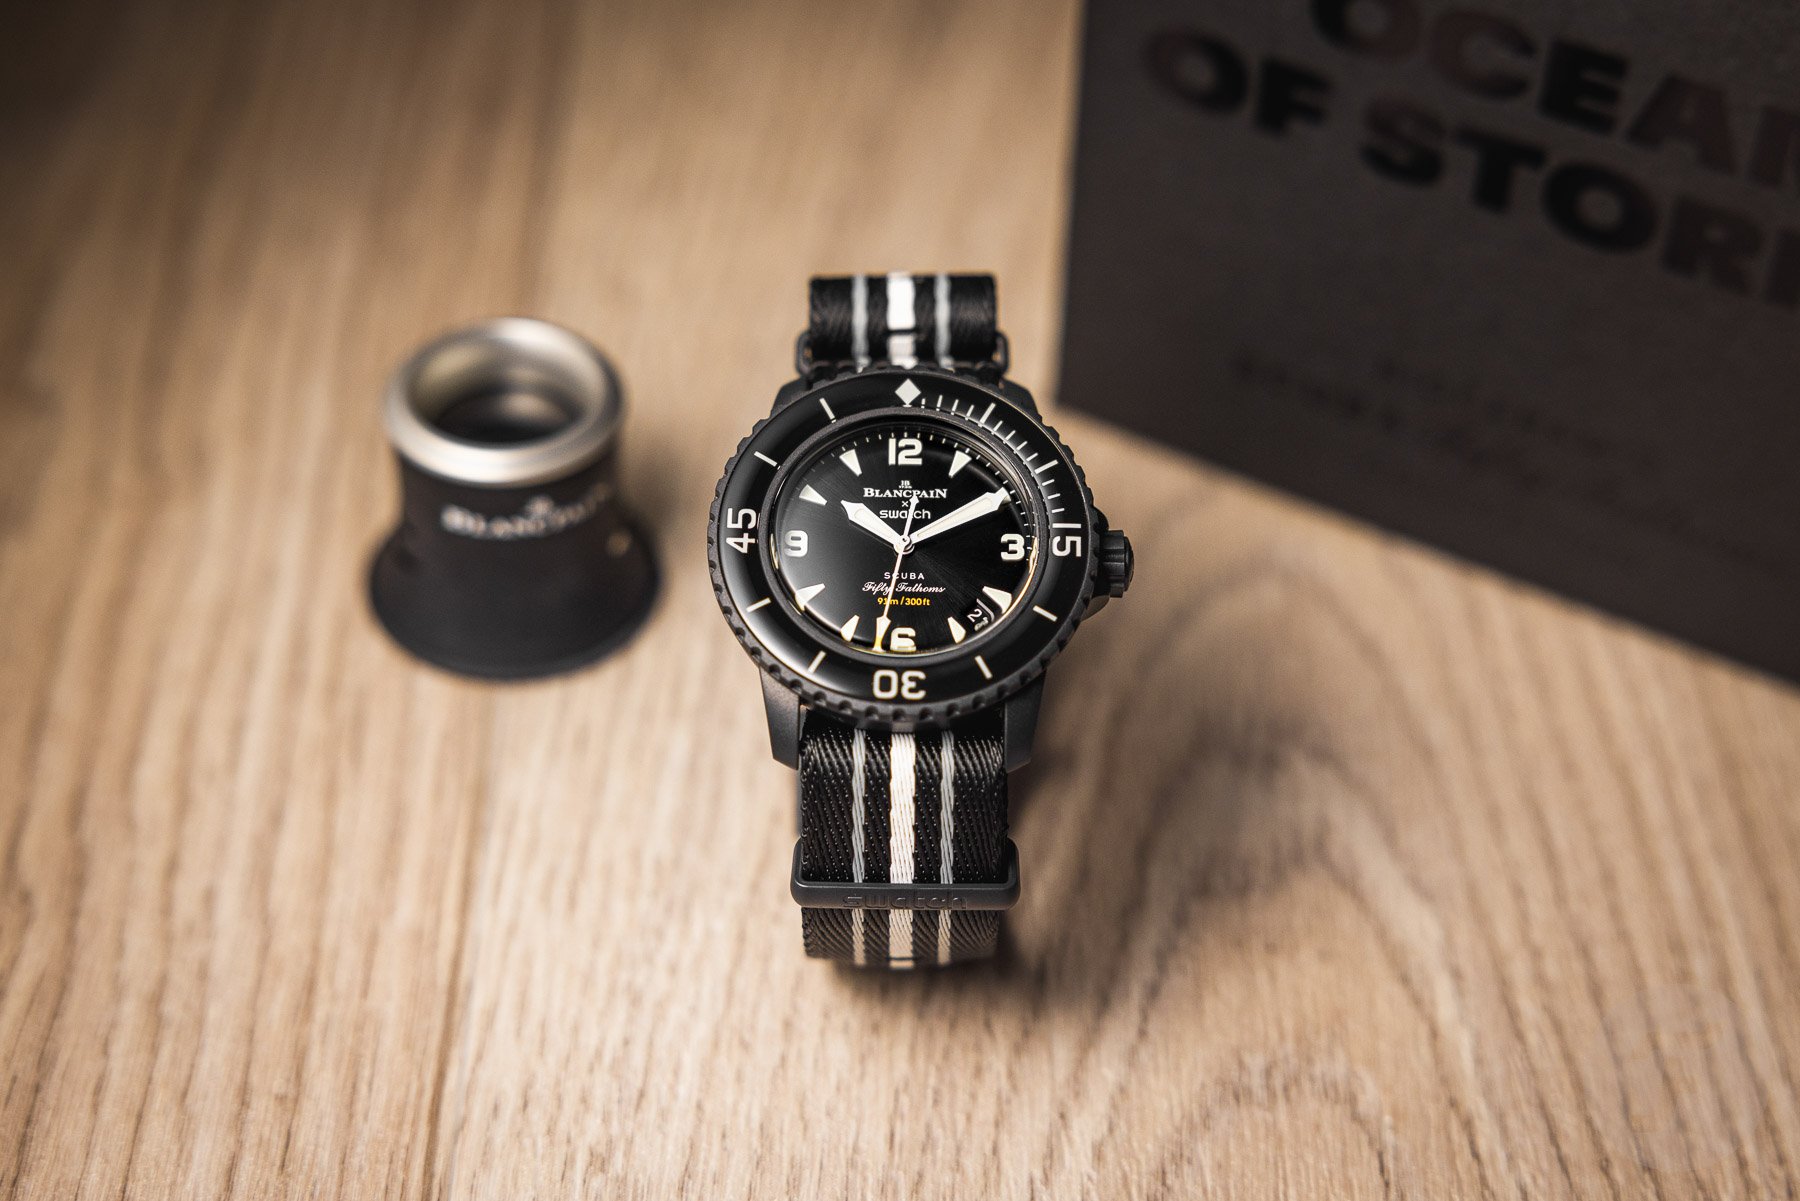 F】 Hands-On: Blancpain × Swatch Ocean Of Storms